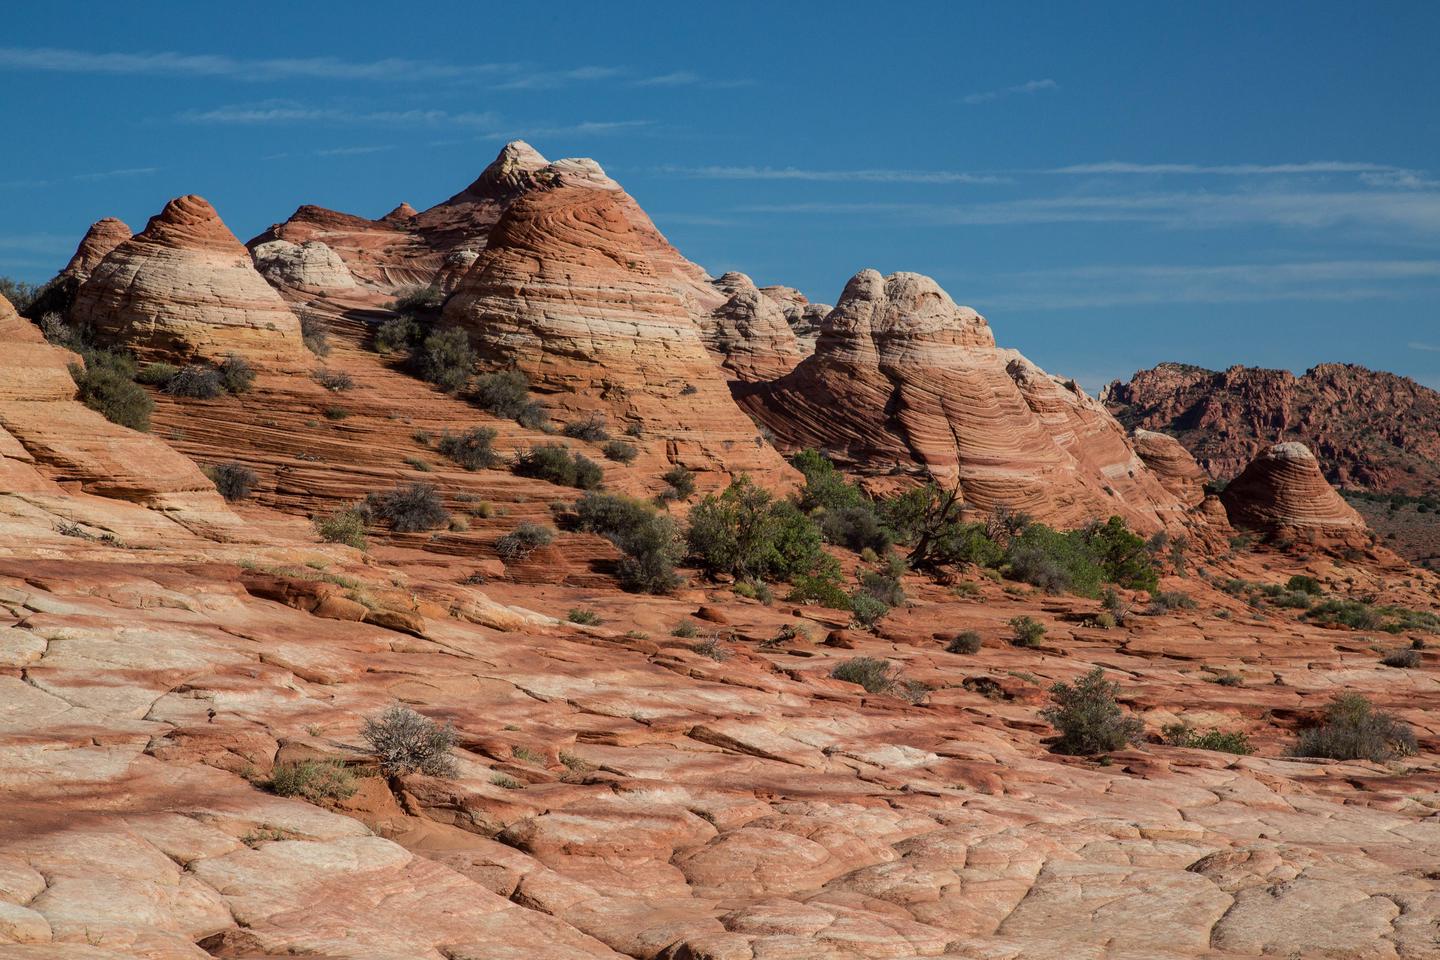 A grouping of teepees in Coyote Buttes North with a sandstone surfaced landscape in the foreground. Coyote Buttes North teepees